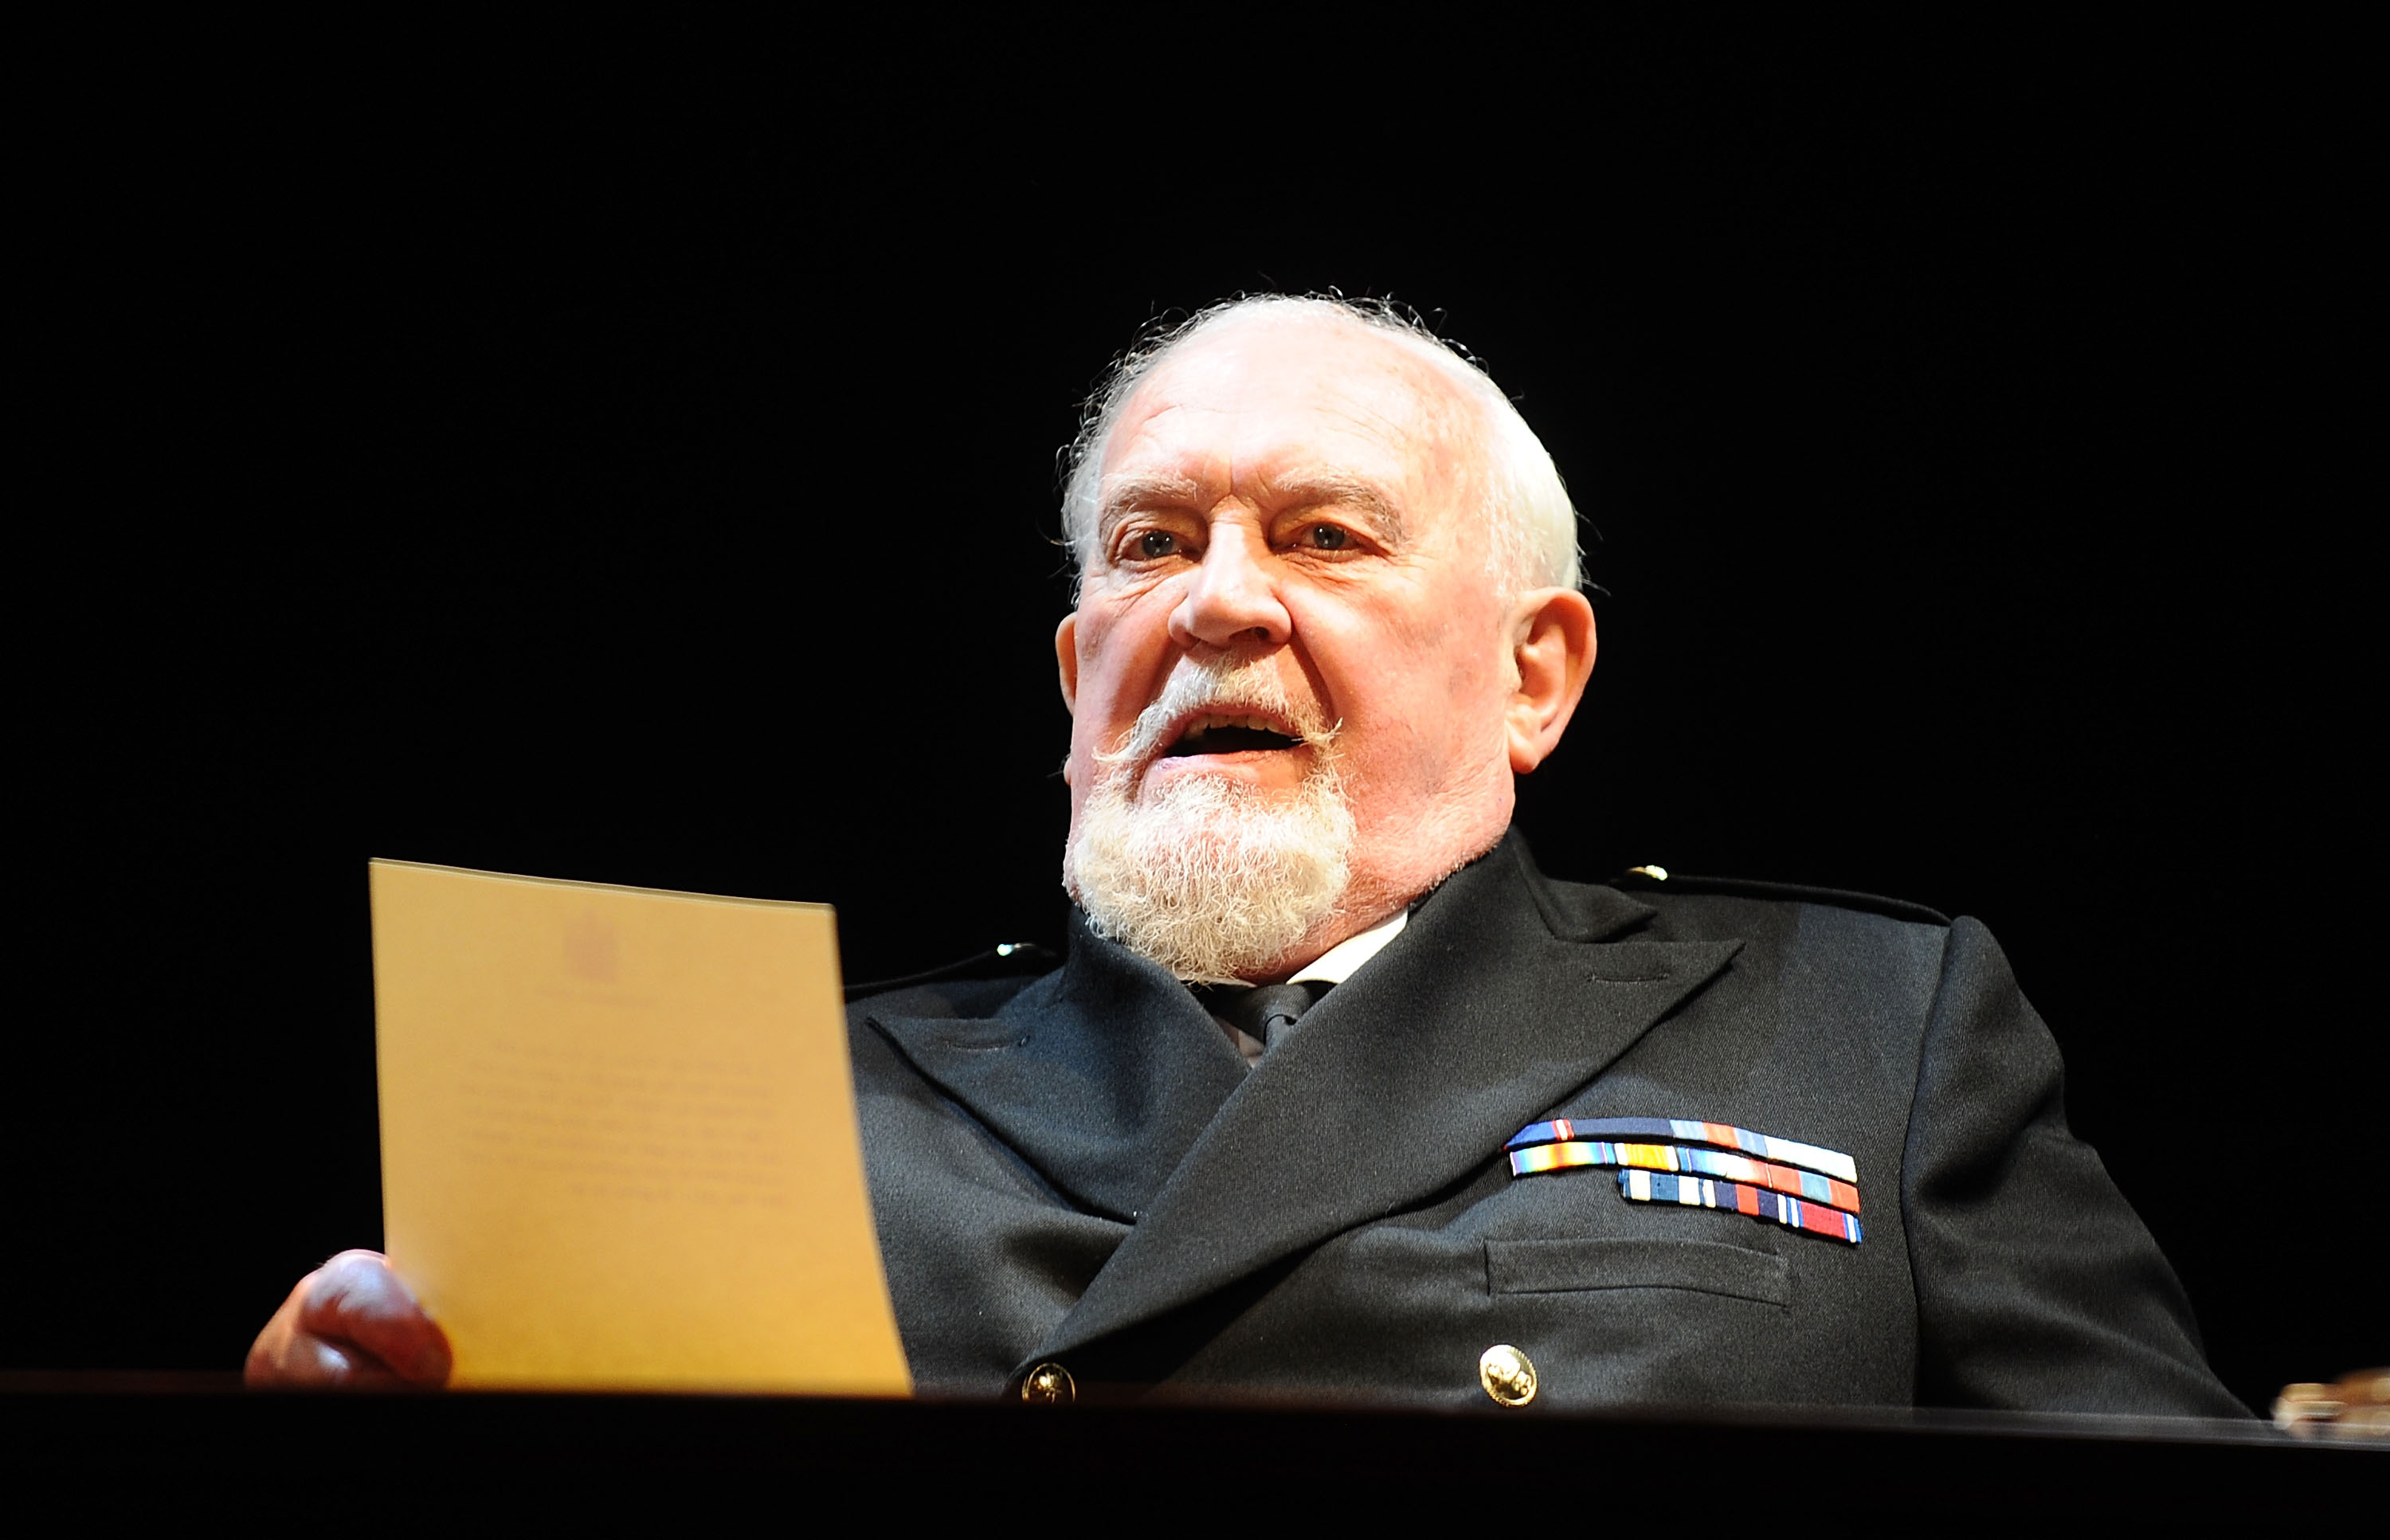 Joss Ackland as King George V in "The Kings Speech" photocall at Wyndhams Theatre on March 26, 2012, in London, England. | Source: Getty Images